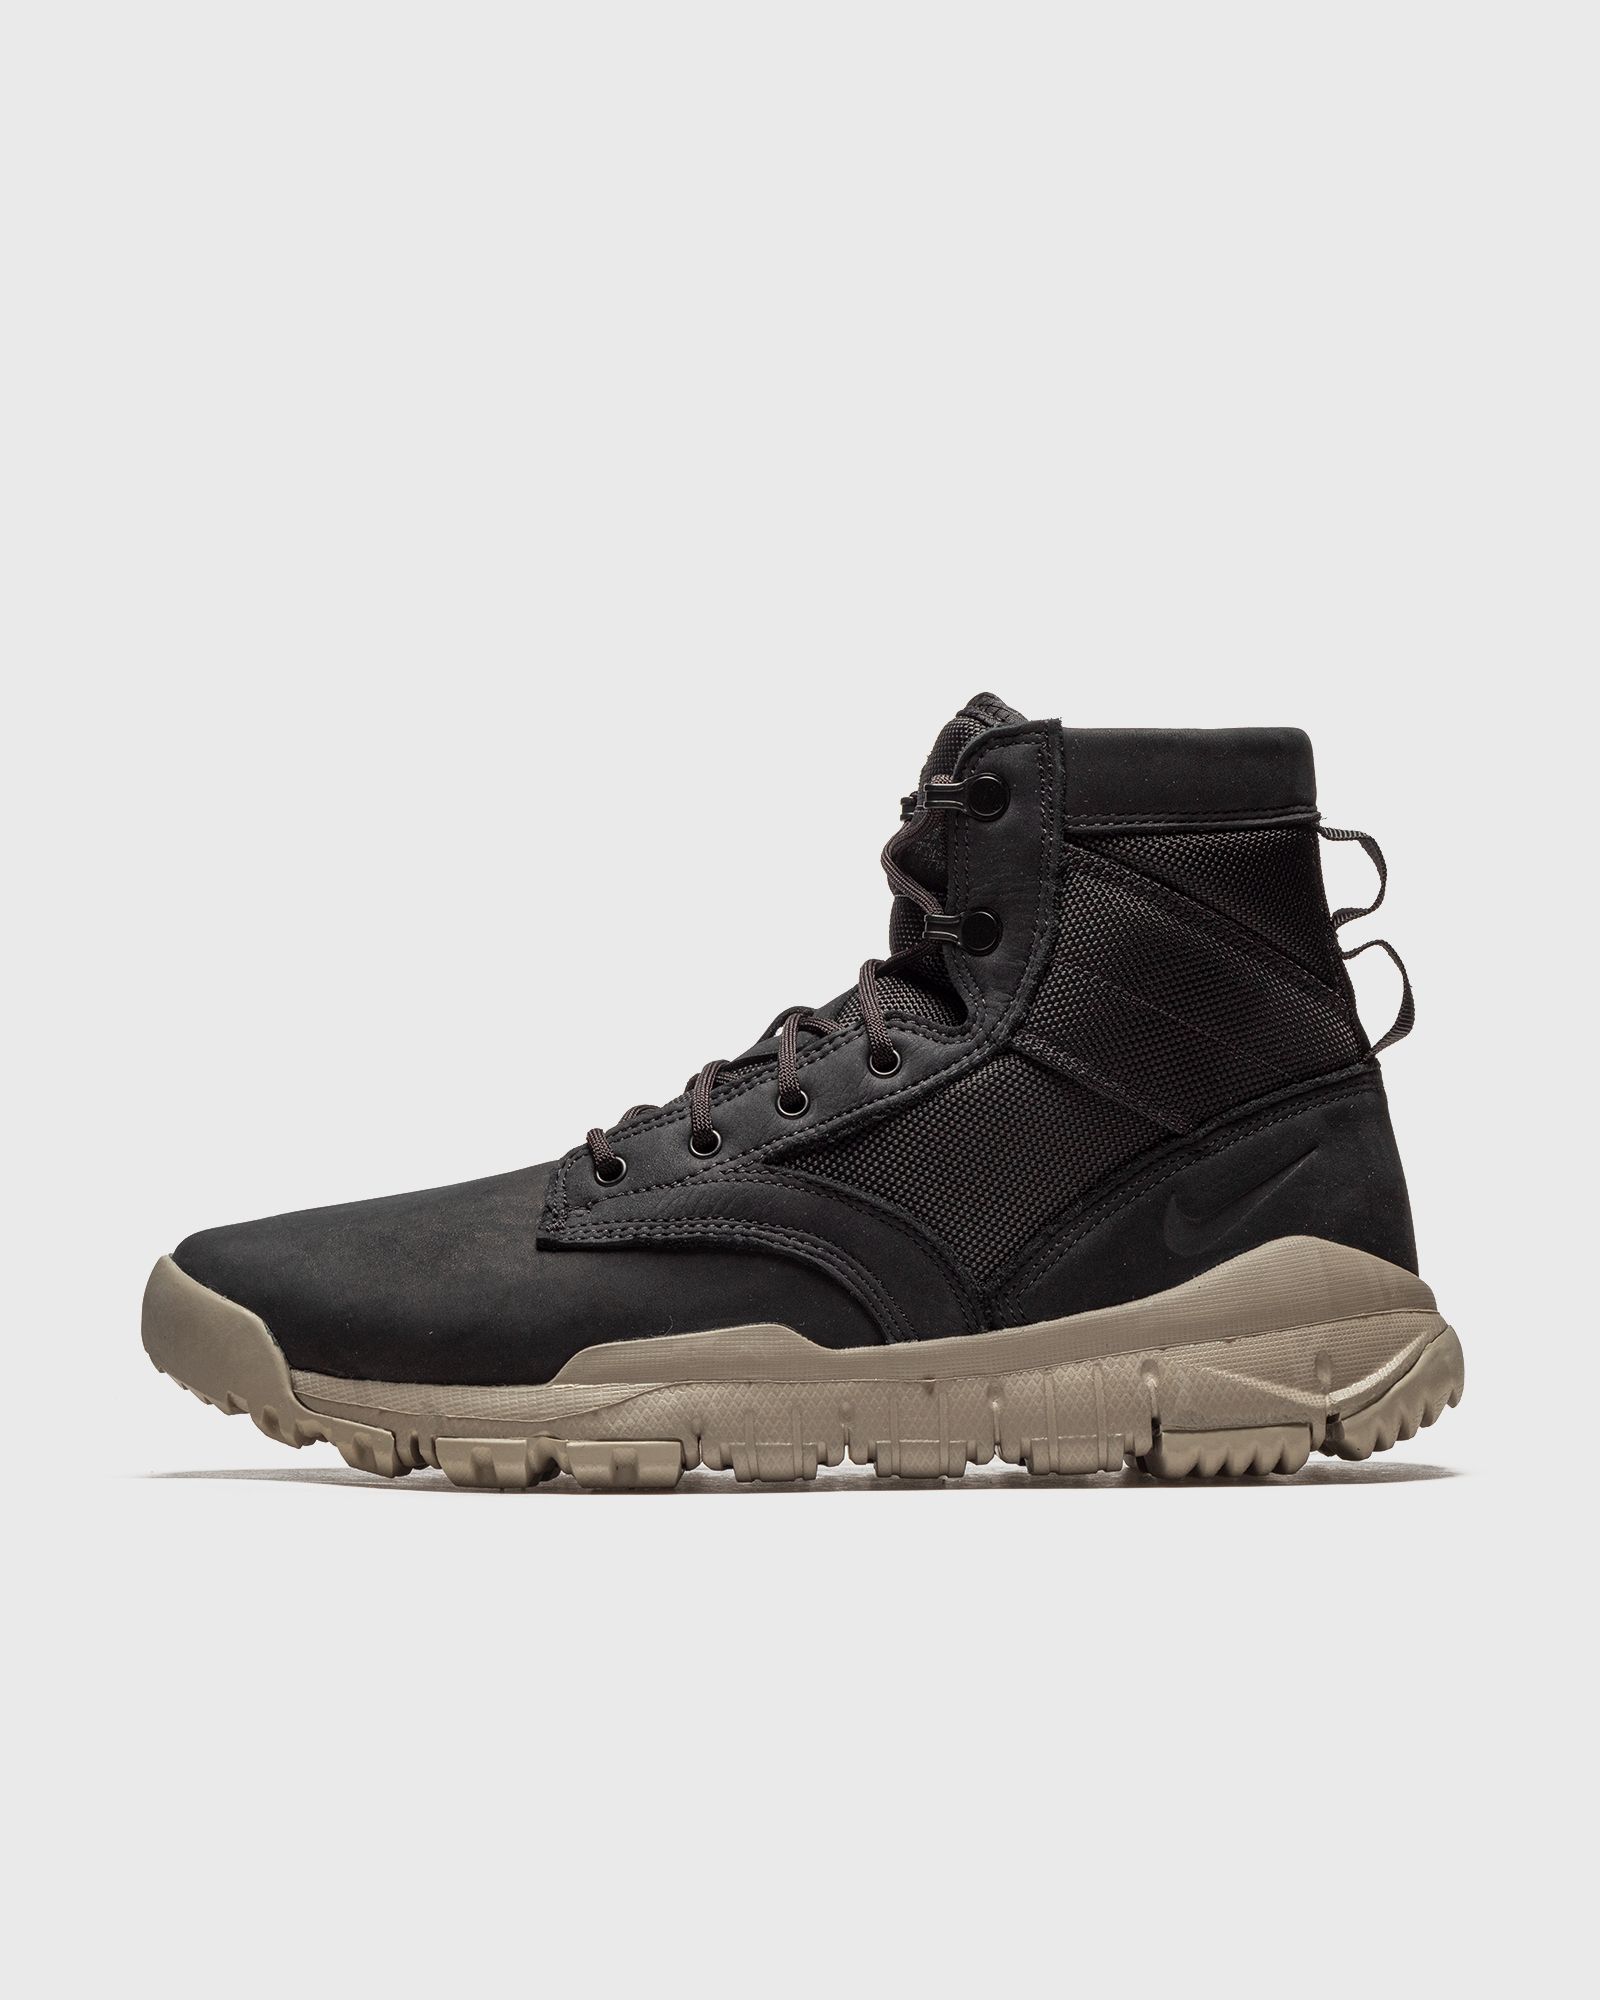 Nike - sfb 6" nsw leather boot men boots black in größe:40